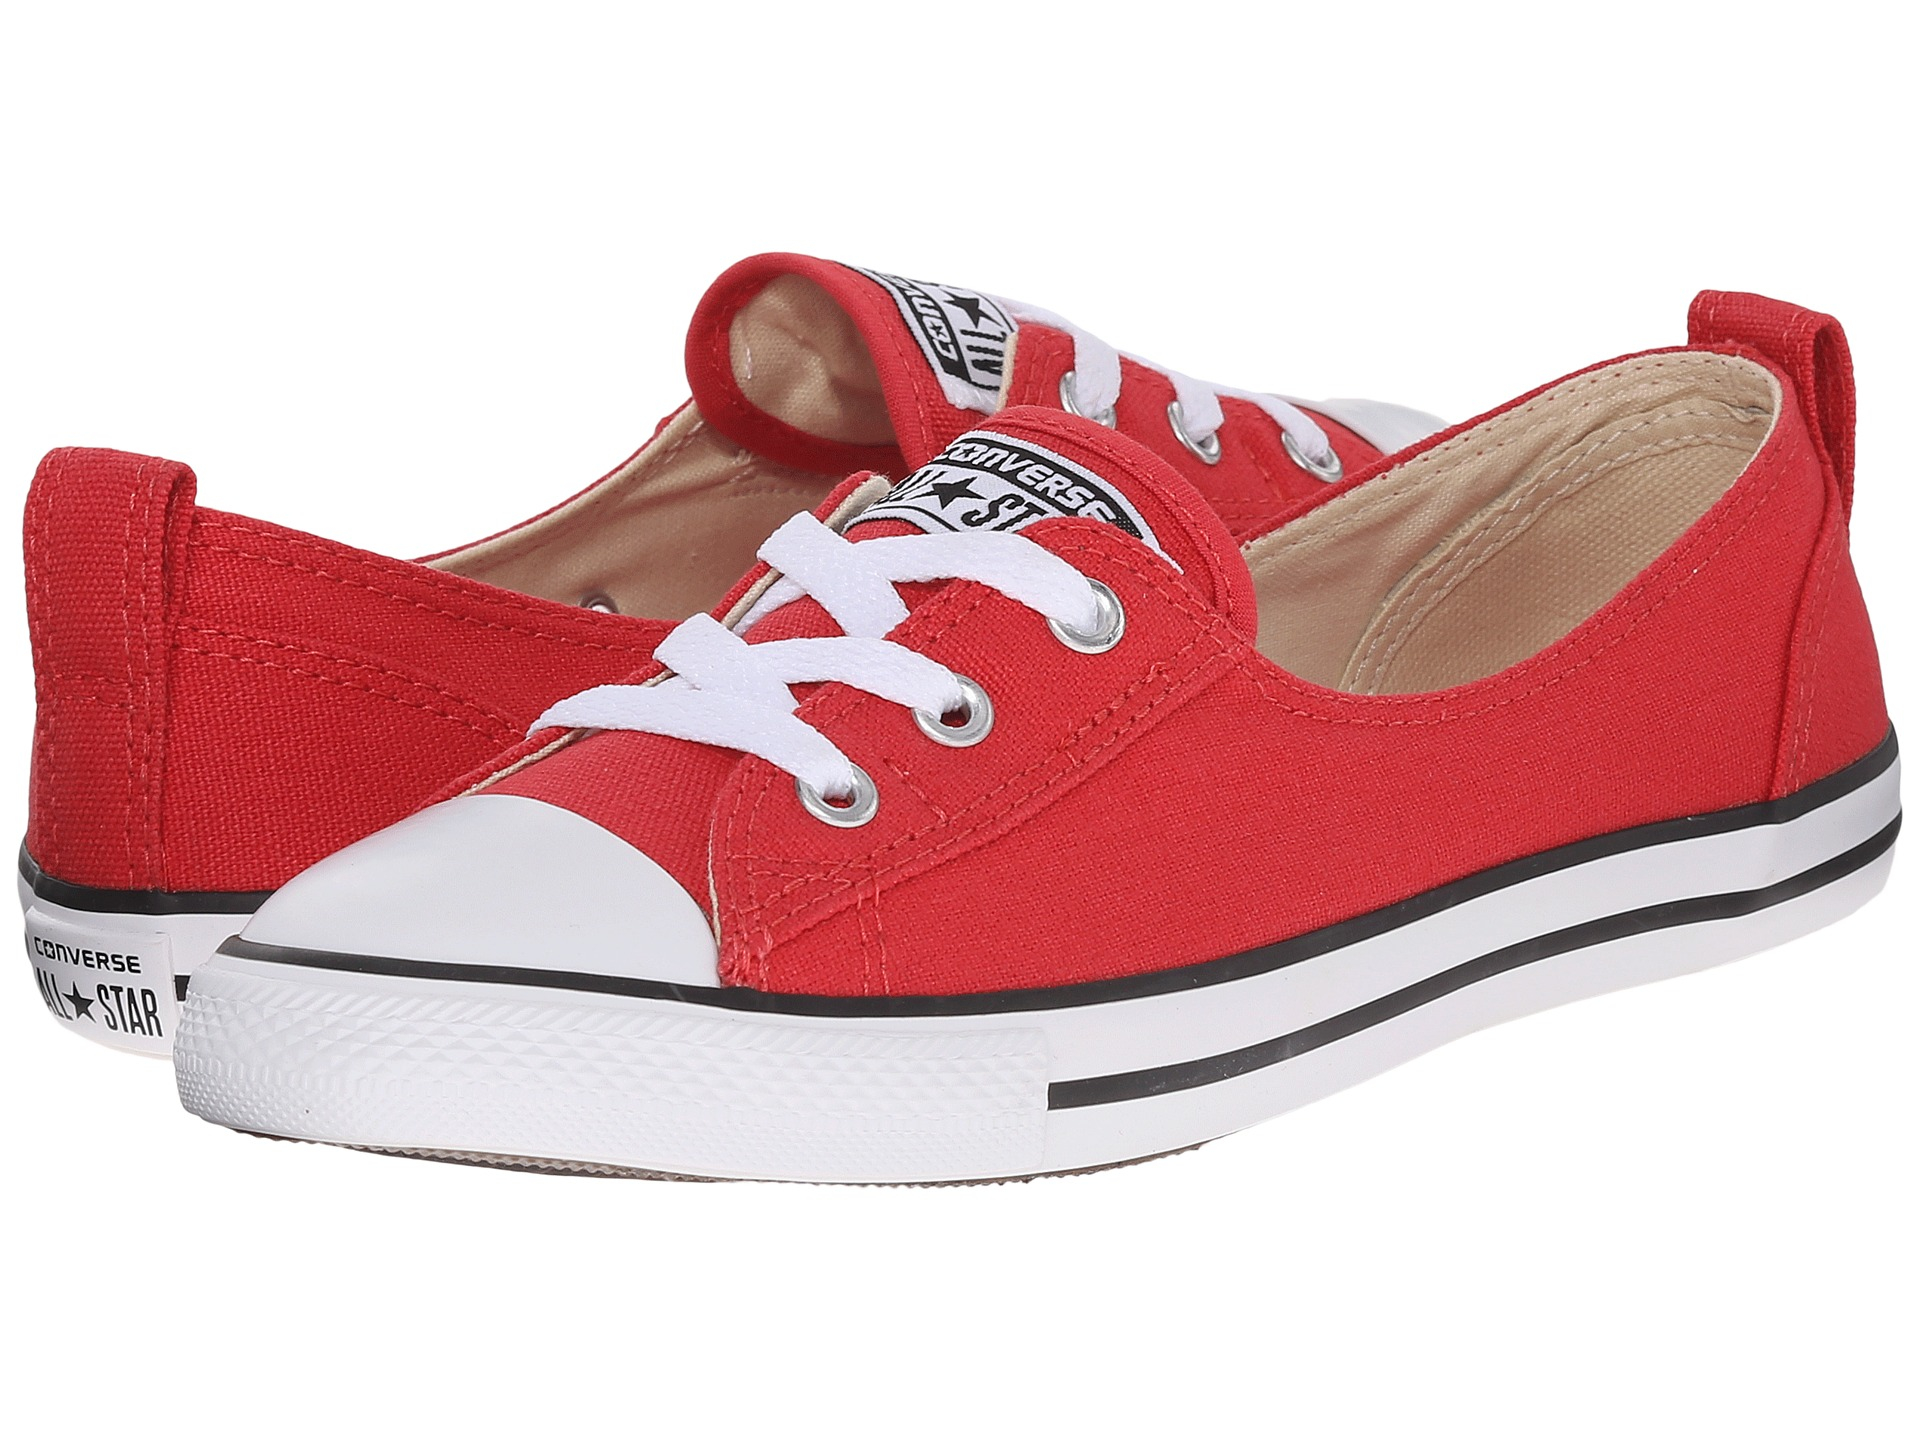 black converse red laces